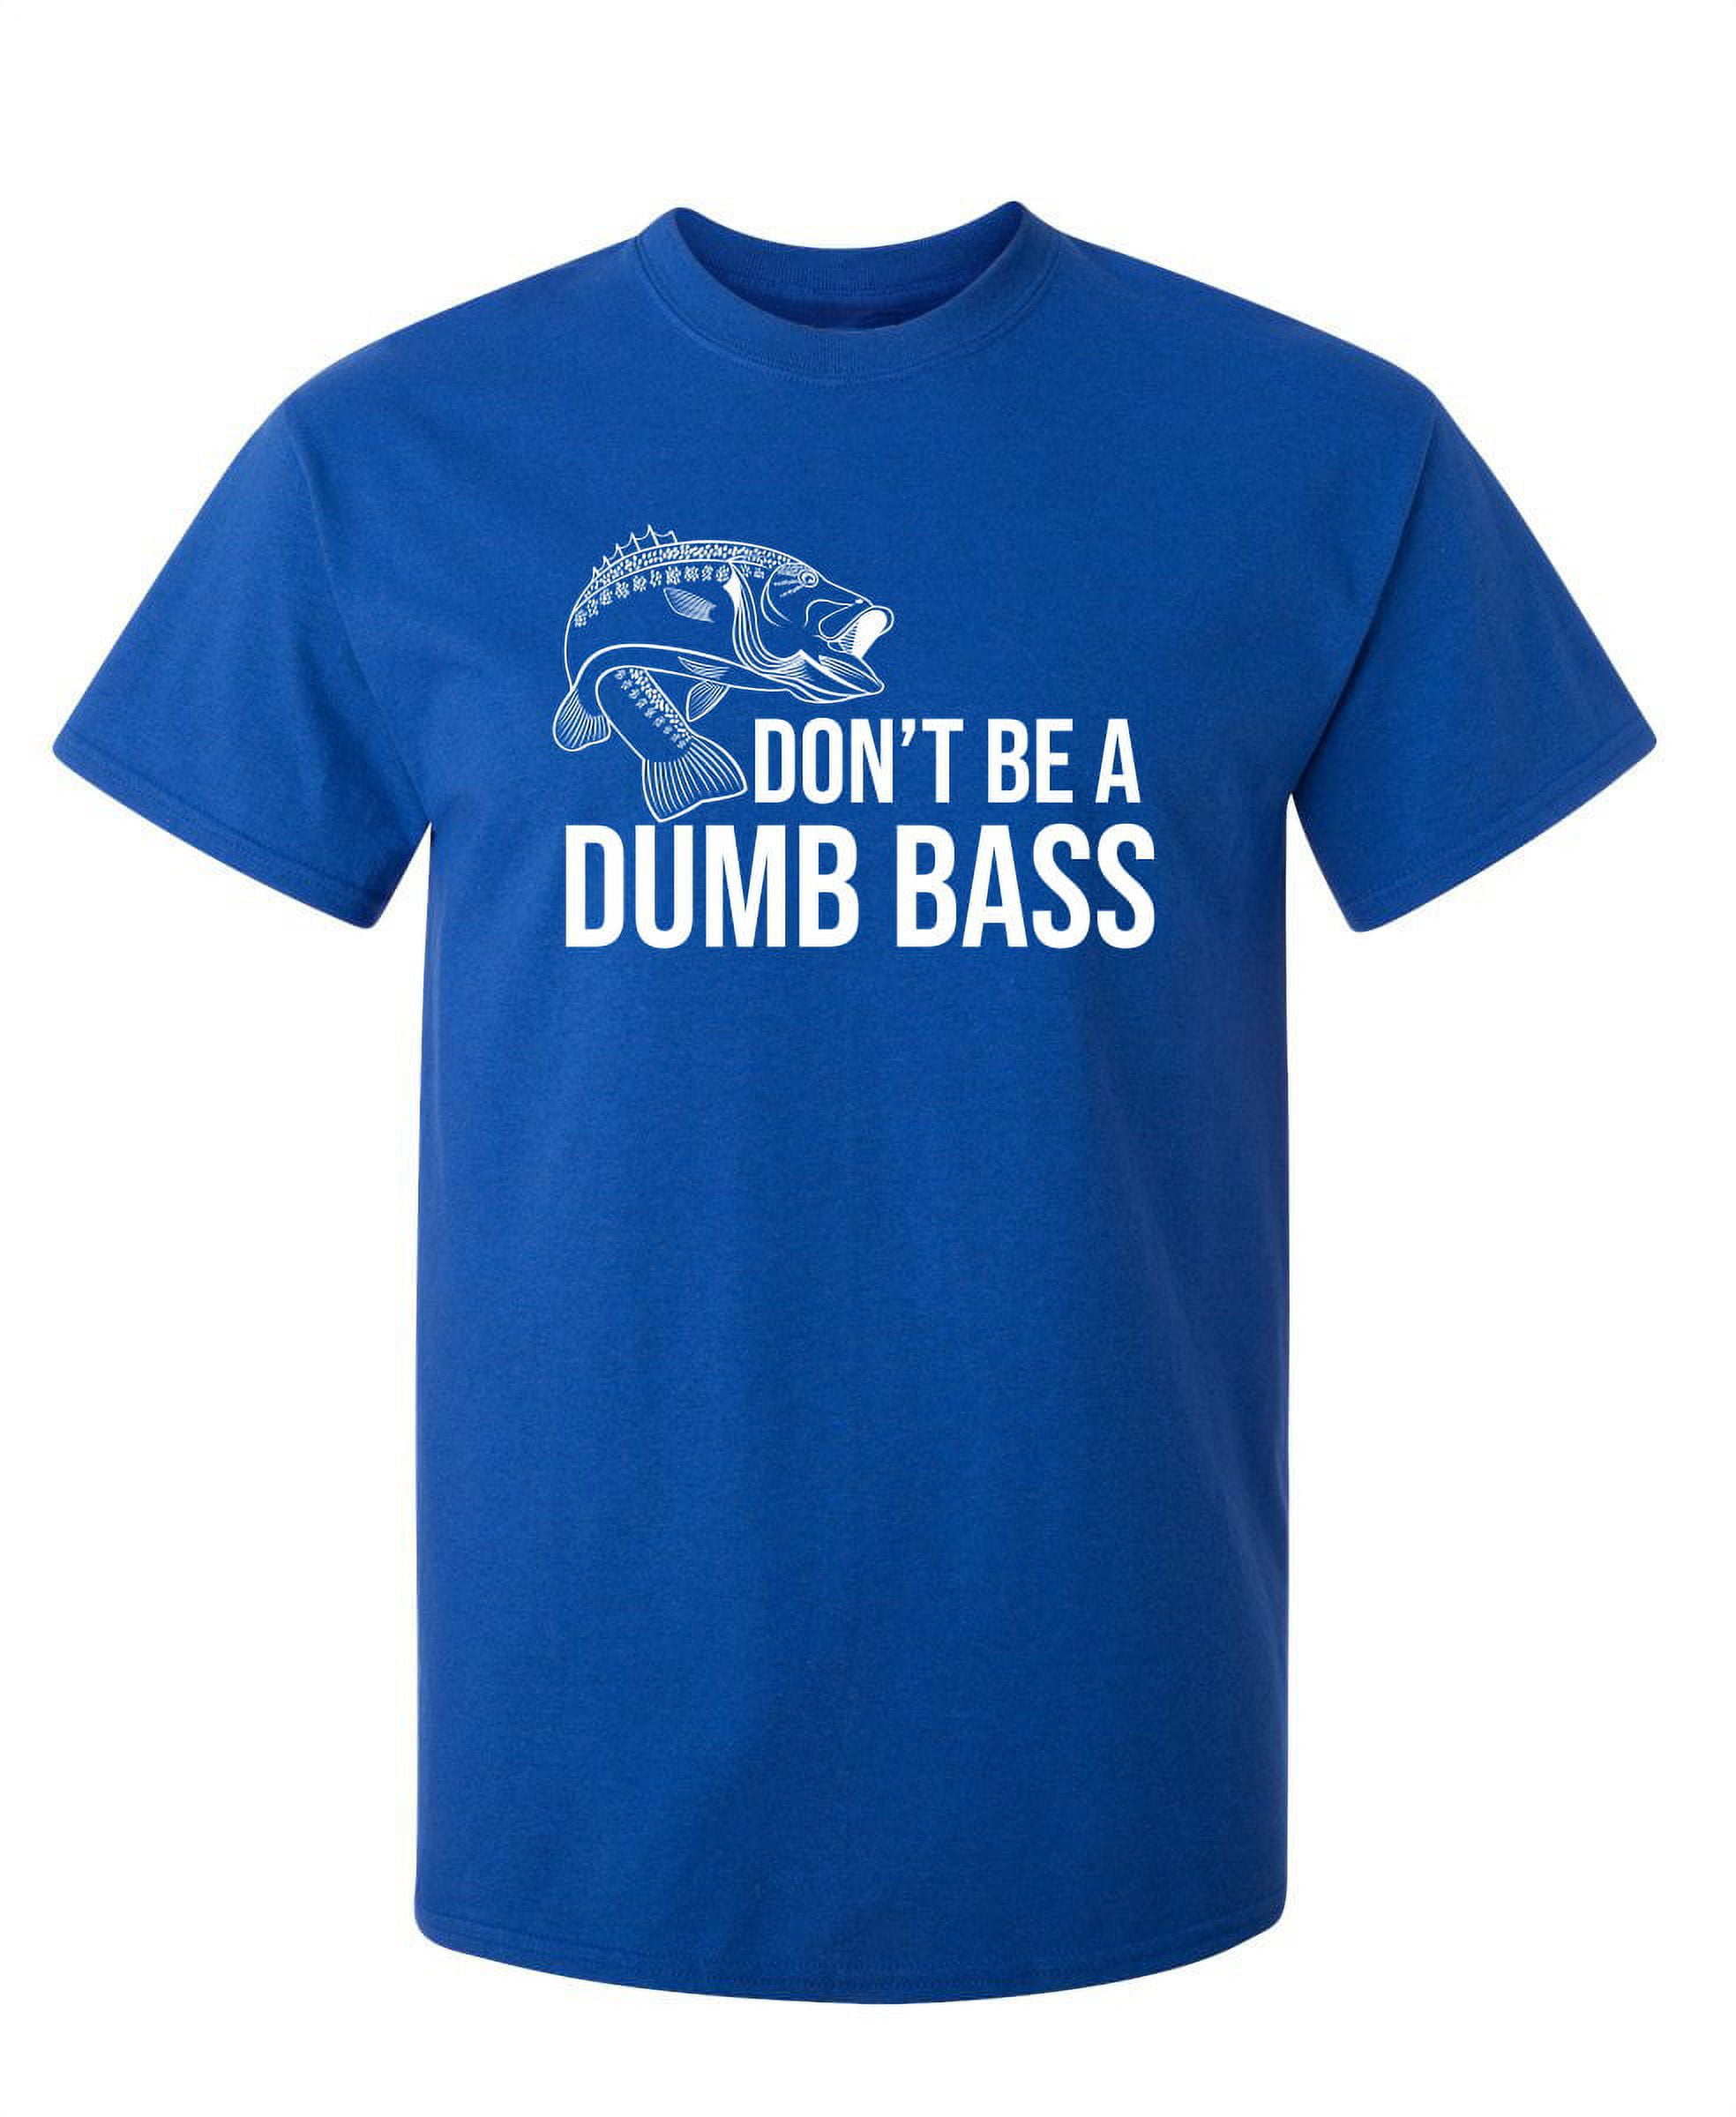 Don't Be A Dumb Bass Sarcastic Humor Graphic Novelty Funny Tall T